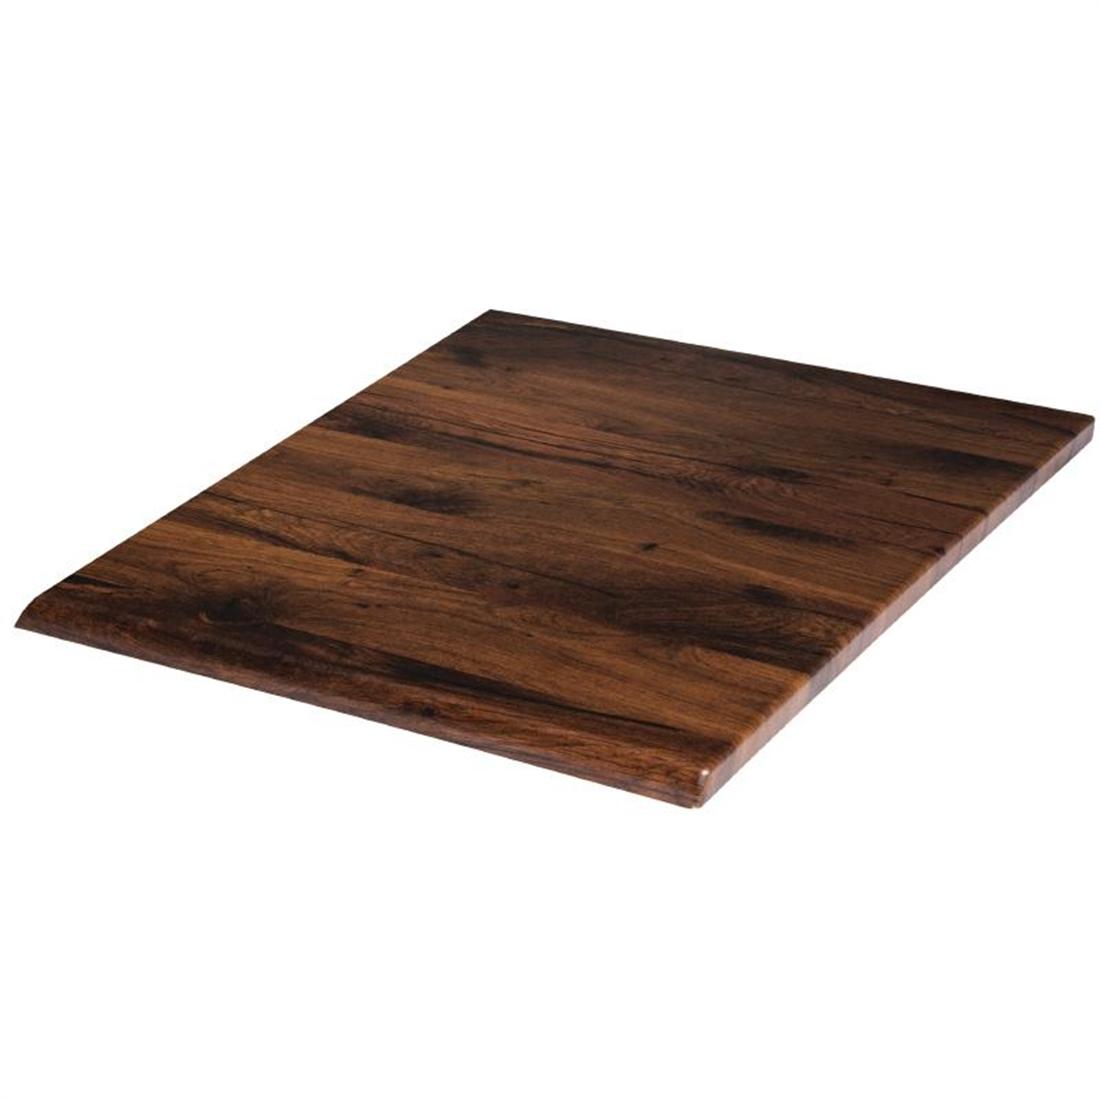 Werzalit Pre-drilled Square Table Top Antique Oak 700mm - CG721  - 2